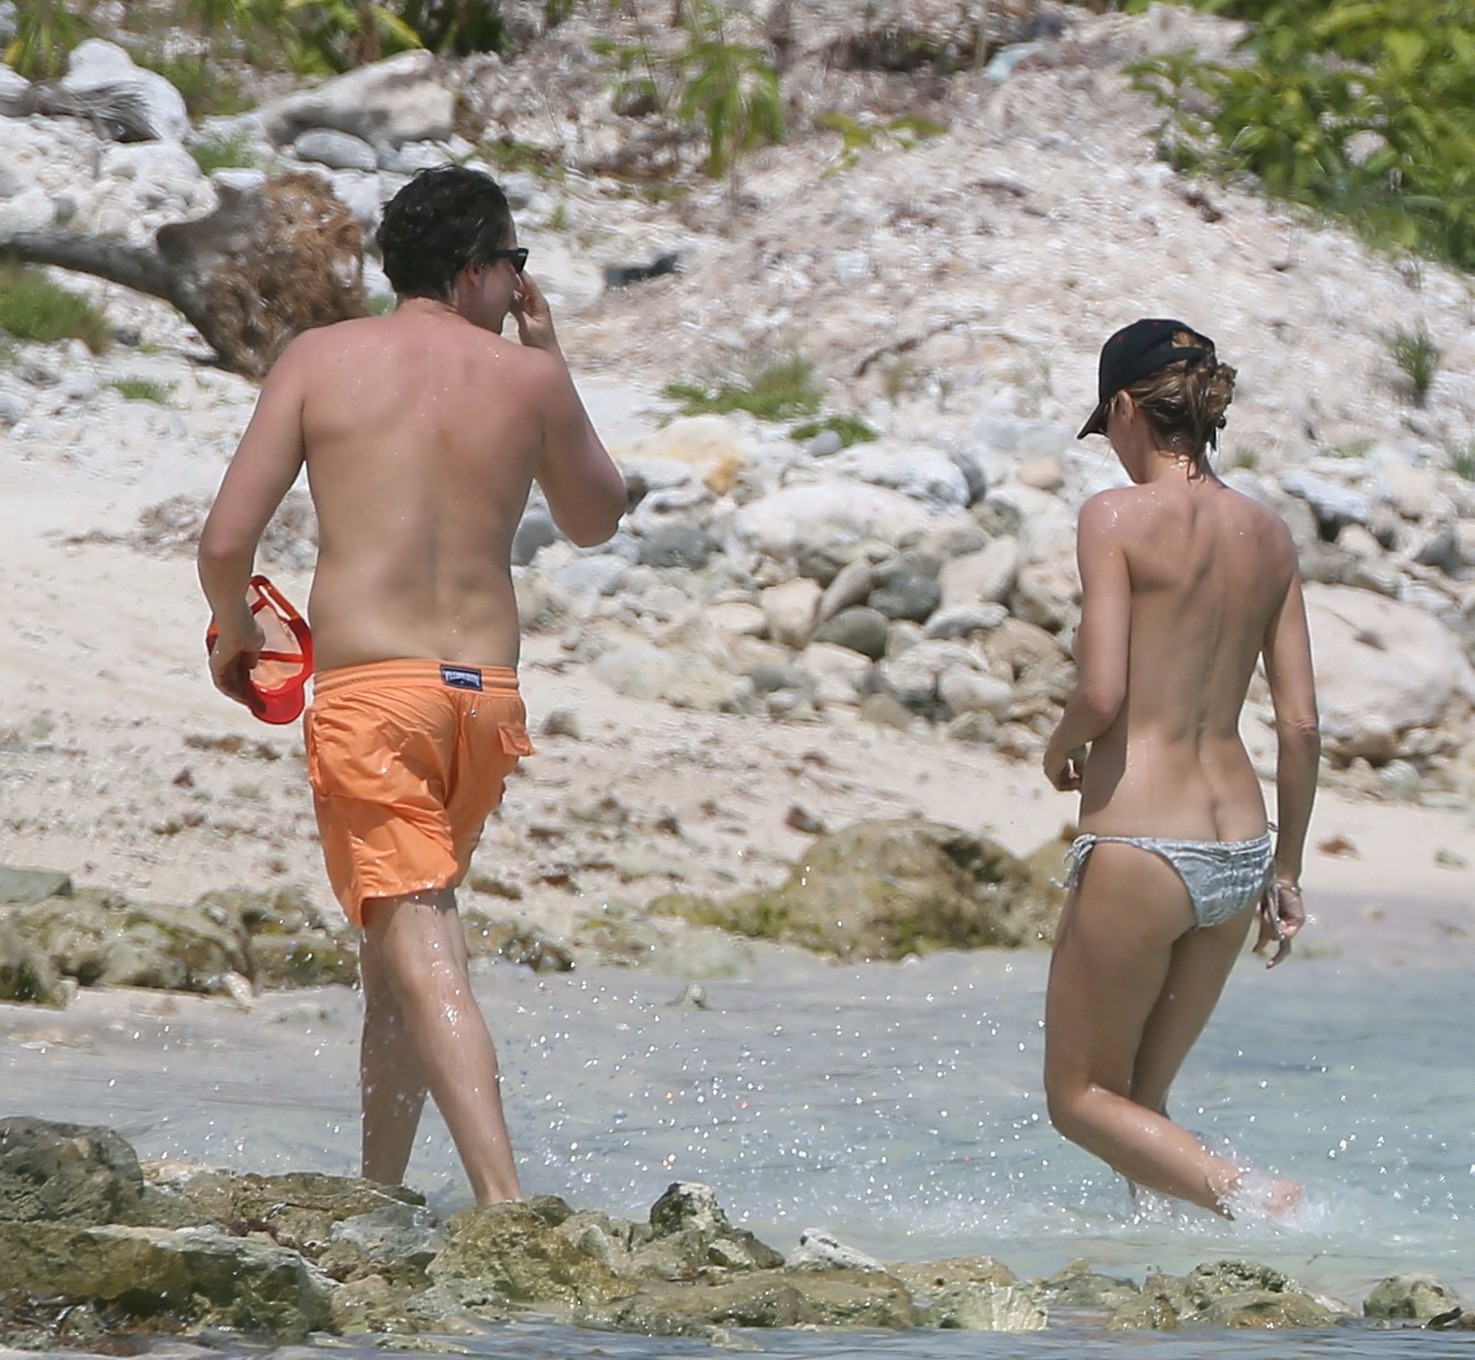 Heidi Klum teasing topless with her BF at the beach in Mexico #75199180